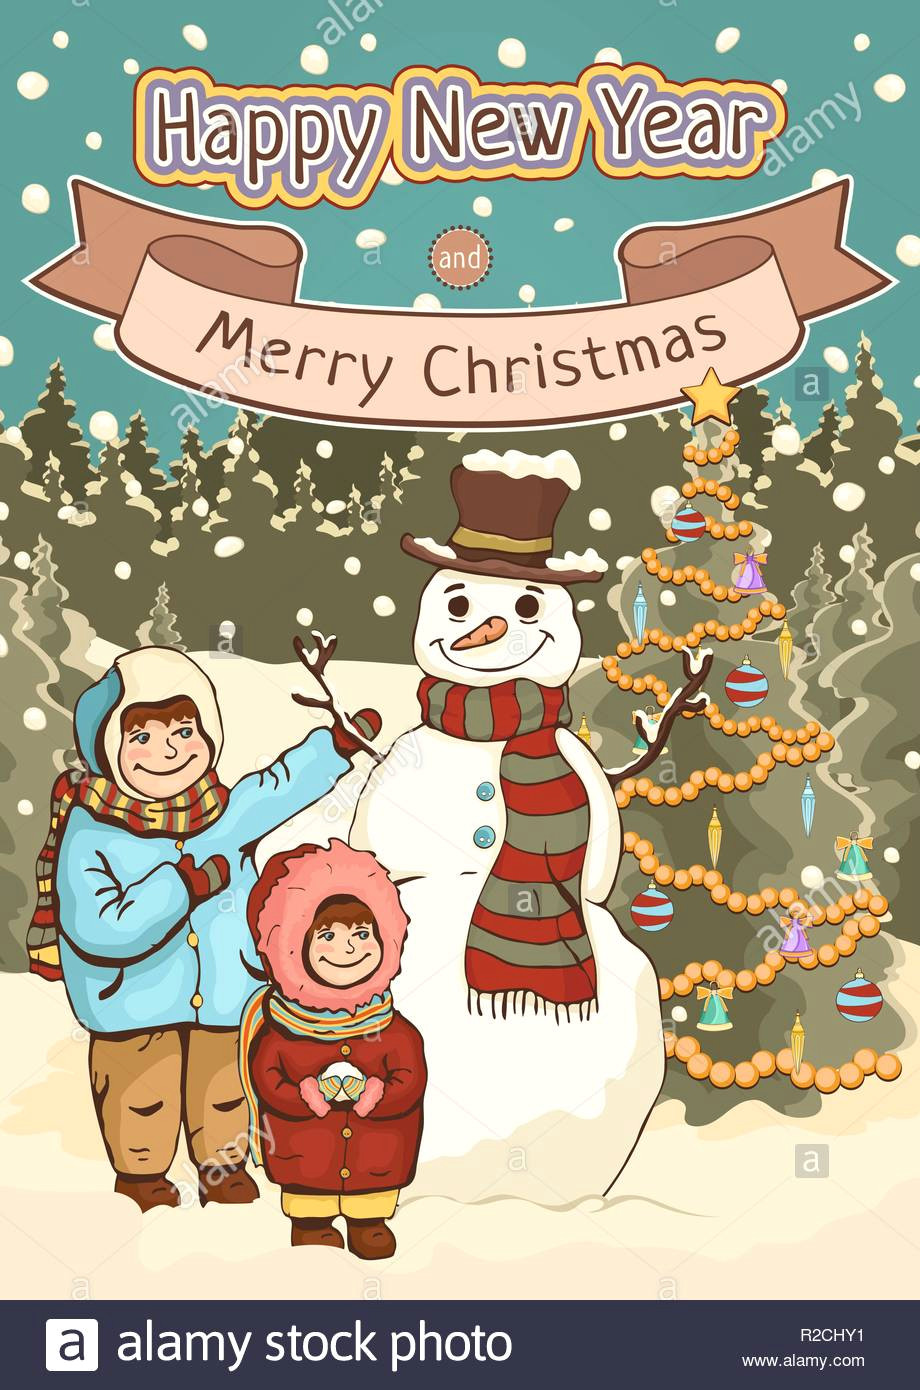 merry christmas and happy new year card poster cartoon colorful drawing vector illustration holiday background cute boy girl and snowman with de